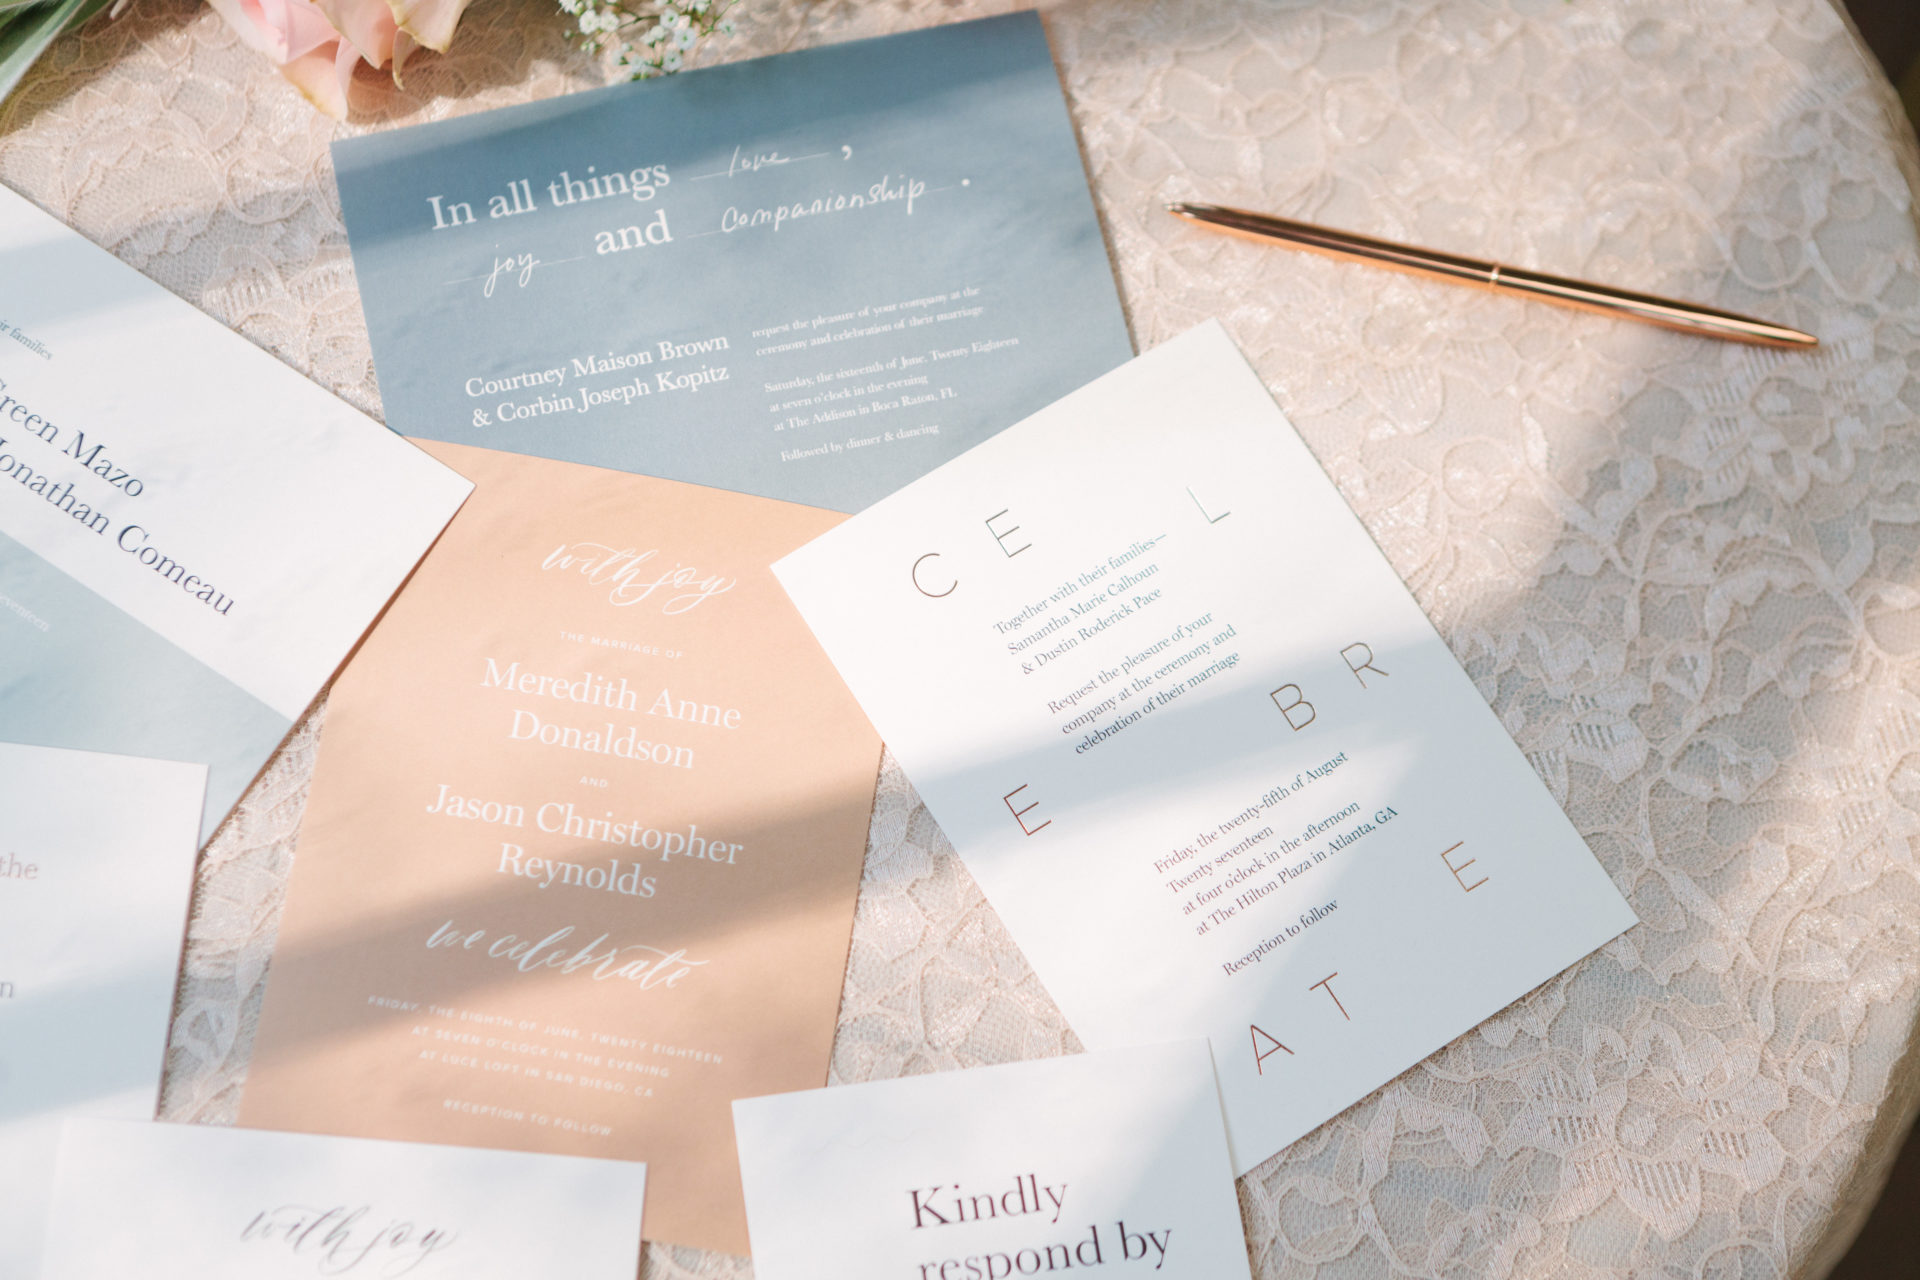 A wedding invitation suite from Artifact Uprising, spread on a table